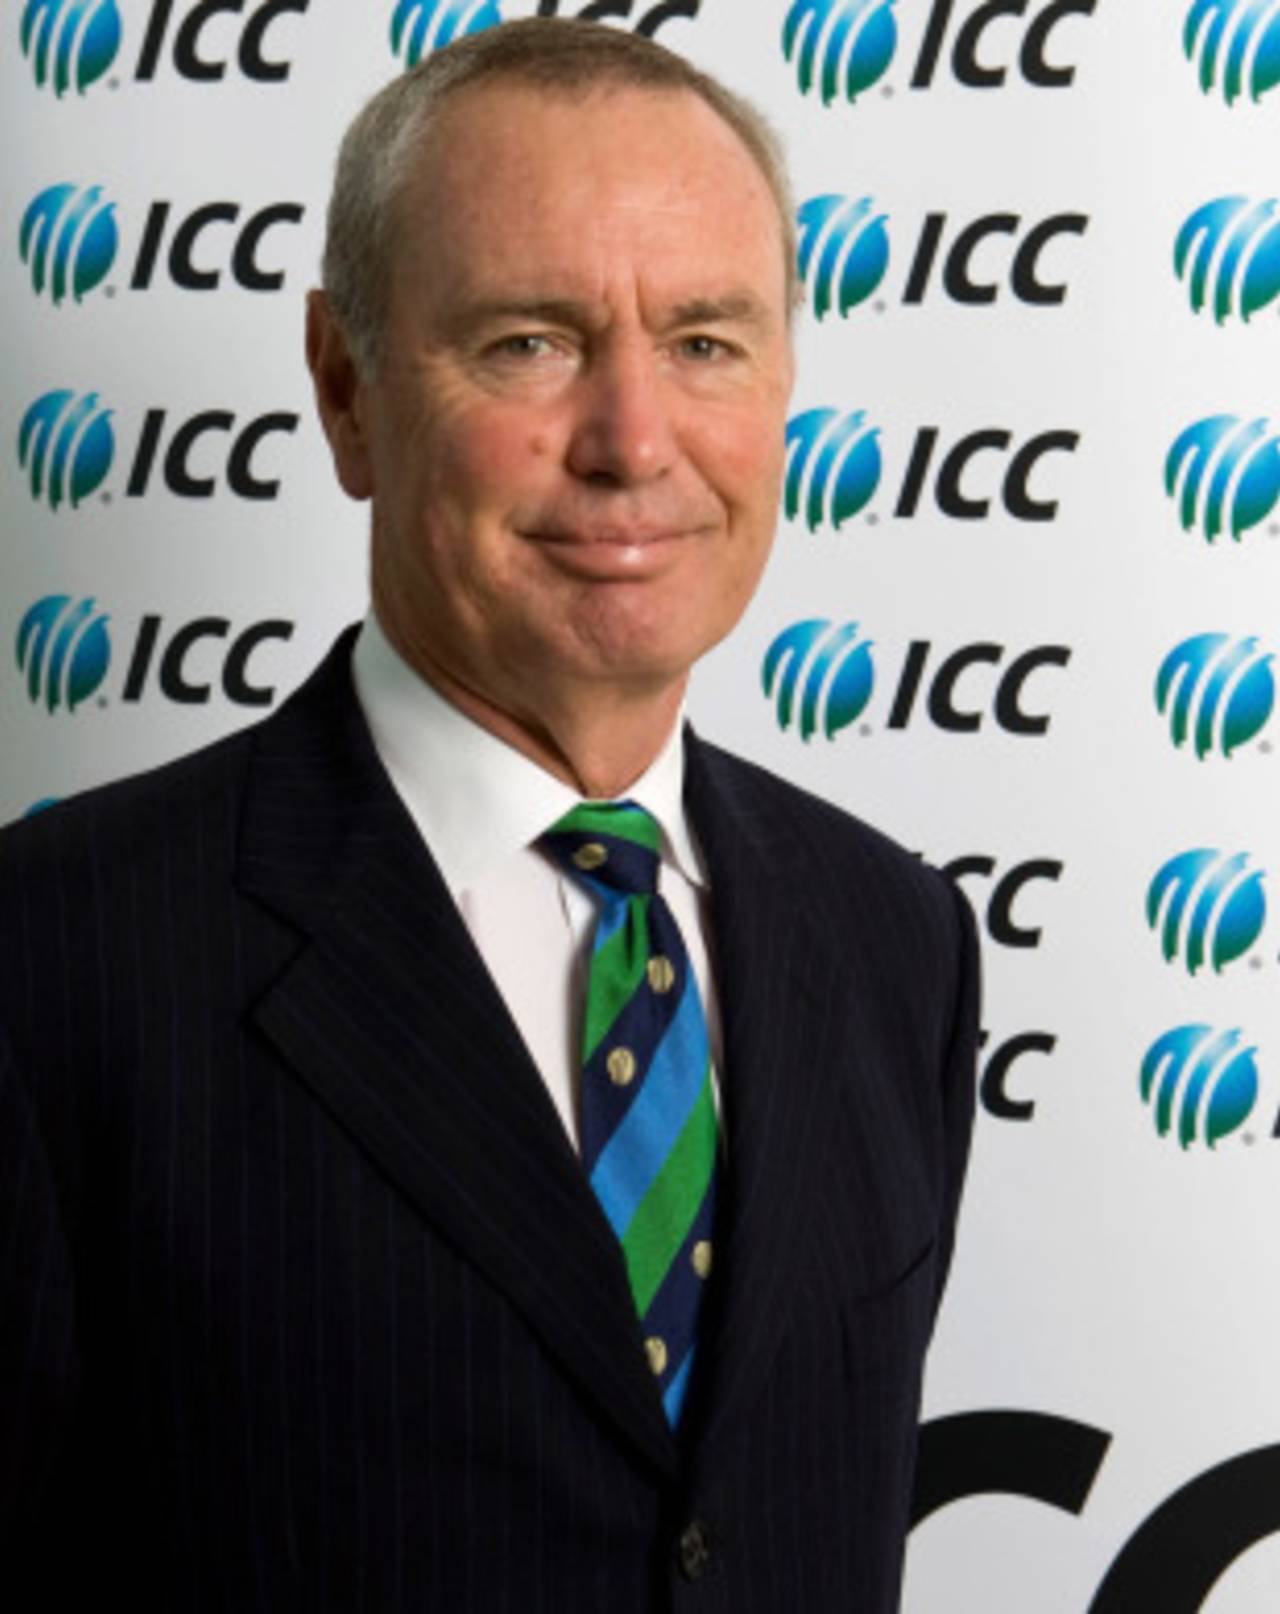 Alan Isaac, the ICC vice-president, at the ICC board meeting, Dubai, October 12, 2010 